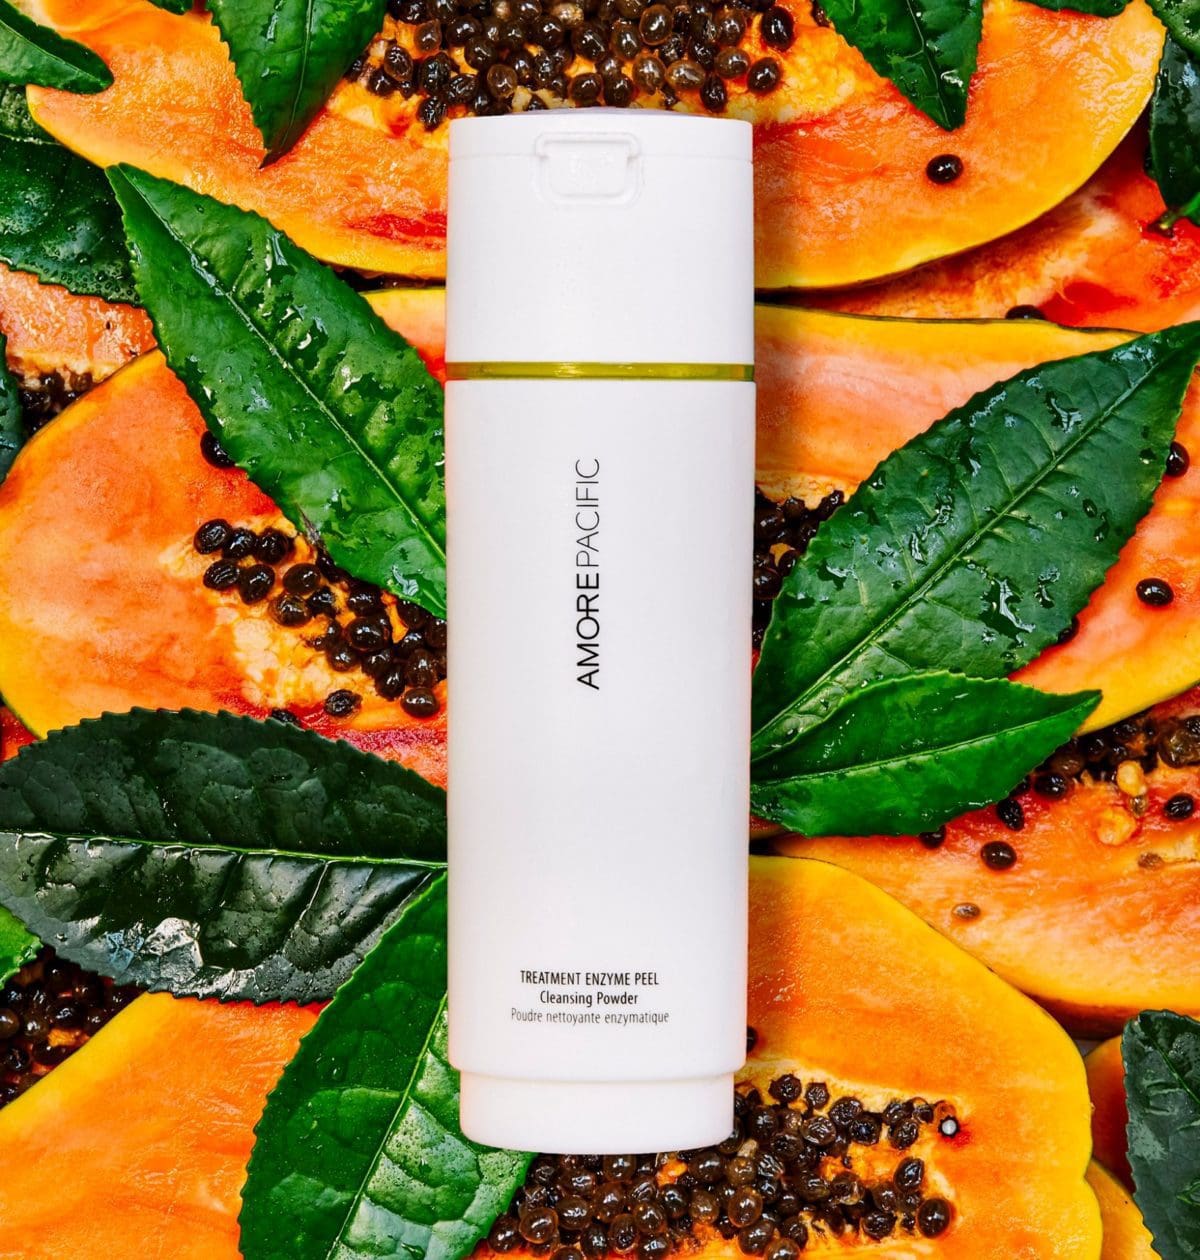 The AMOREPACIFIC Treatment Enzyme Peel Cleansing Powder is an easy at-home peel formulated for daily use. Besides being easy and effective, this enzyme peel is plant-based. Can it get any better than that!? Read more about this product here!